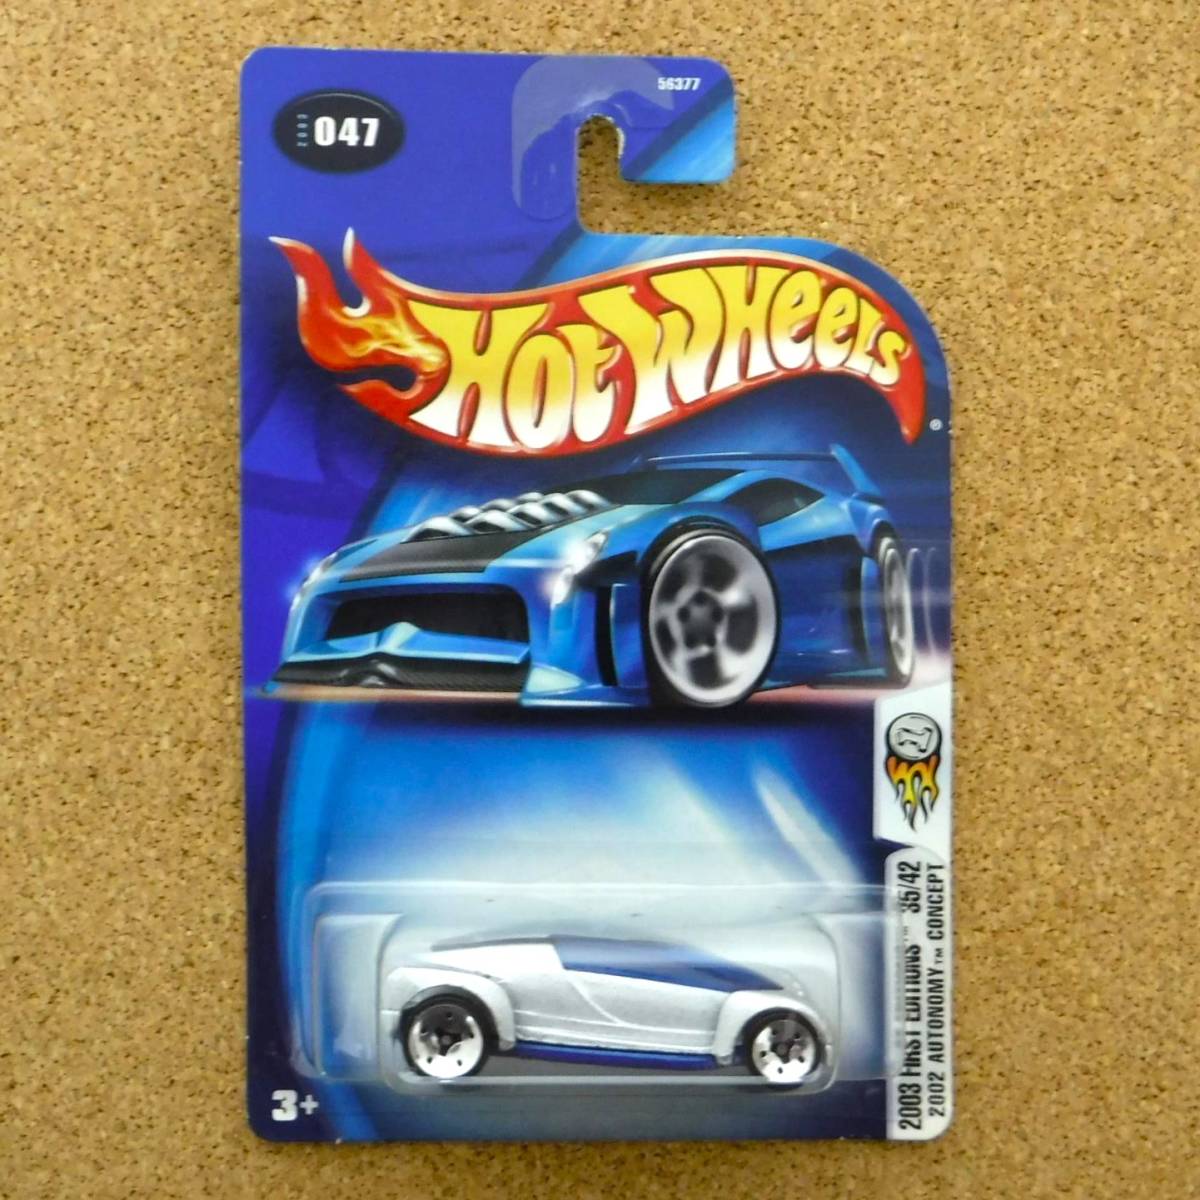 【Hot Wheels】2003 #047 FIRST EDITIONS 35/42 2002 AUTONOMY CONCEPT［0451］